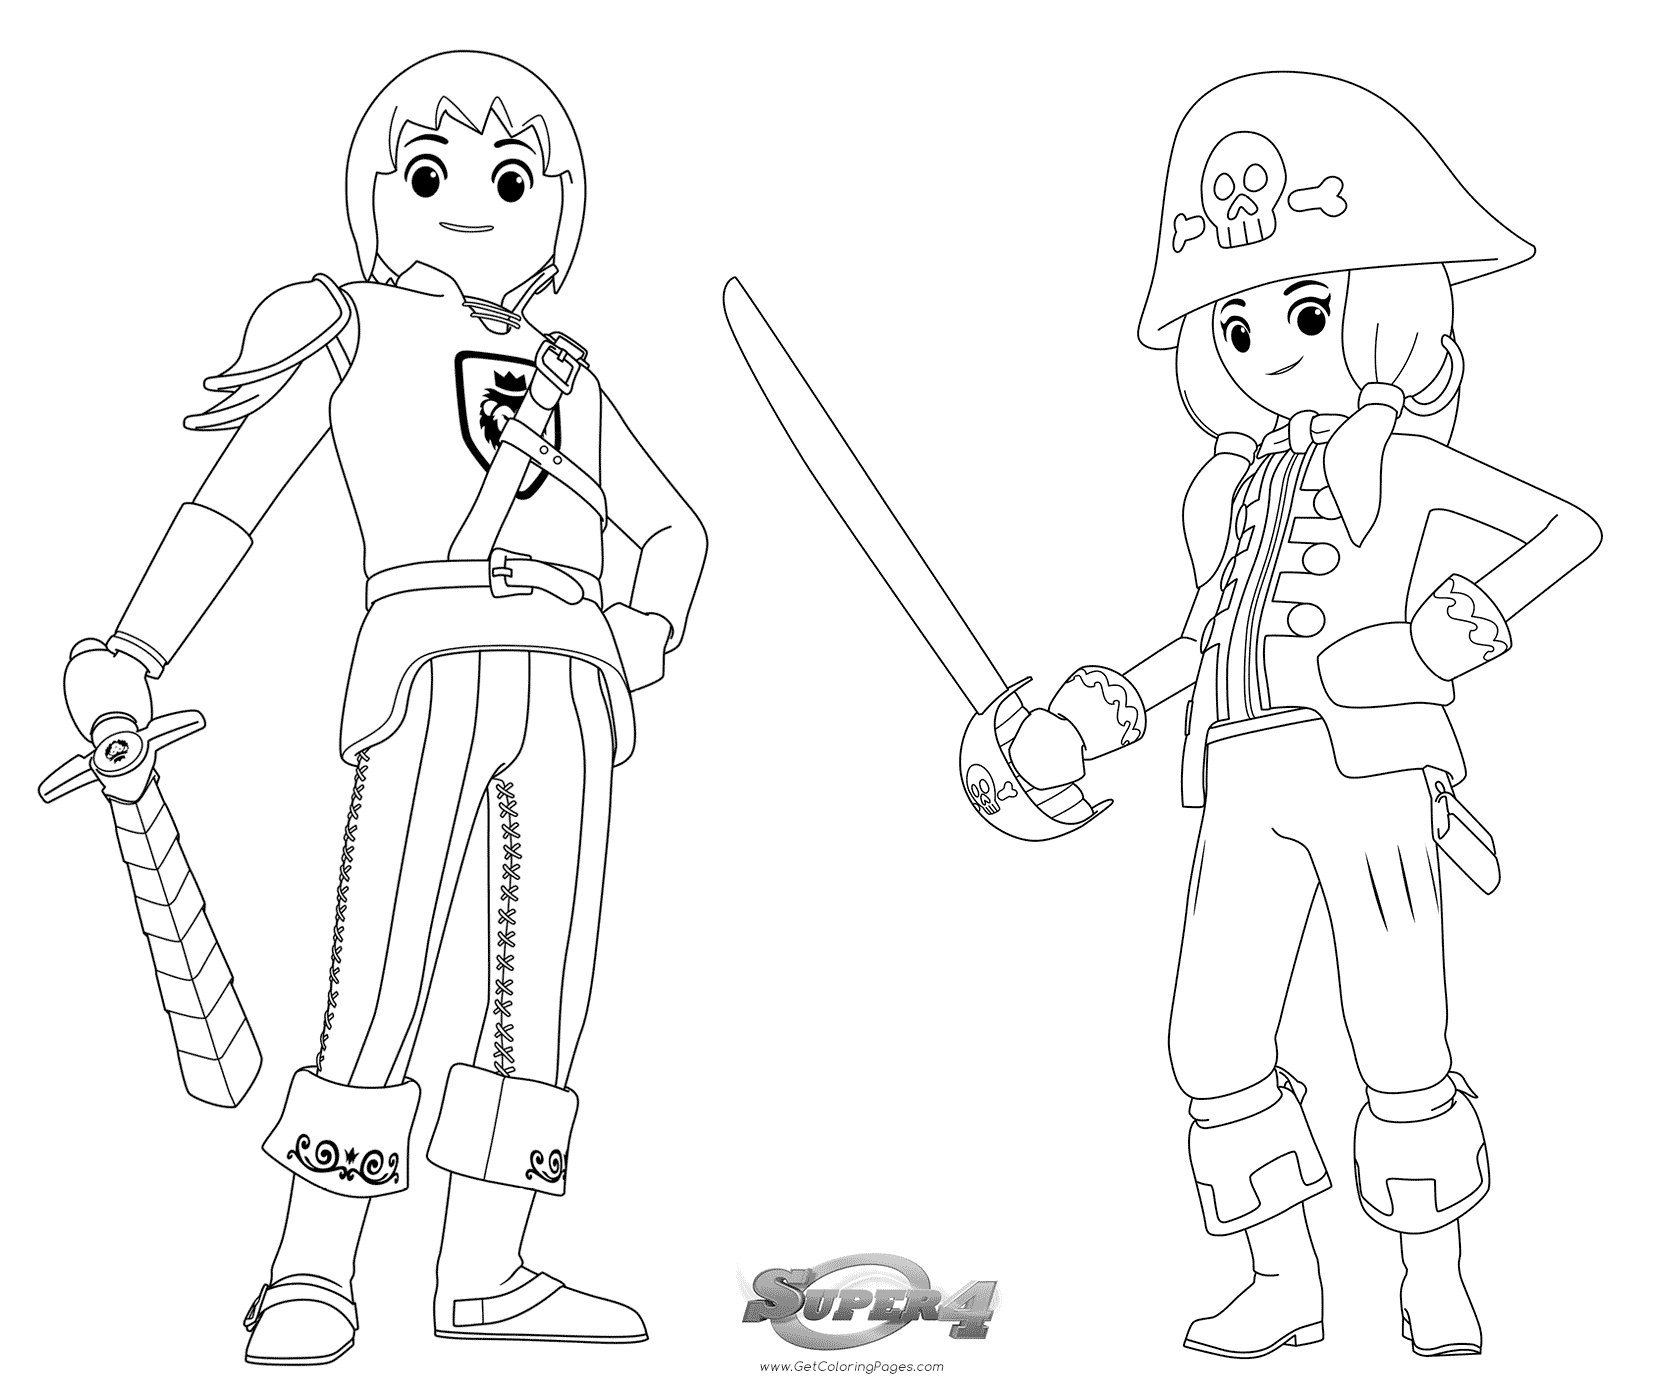 Playmobil Super 4 Coloring Pages - GetColoringPages.com